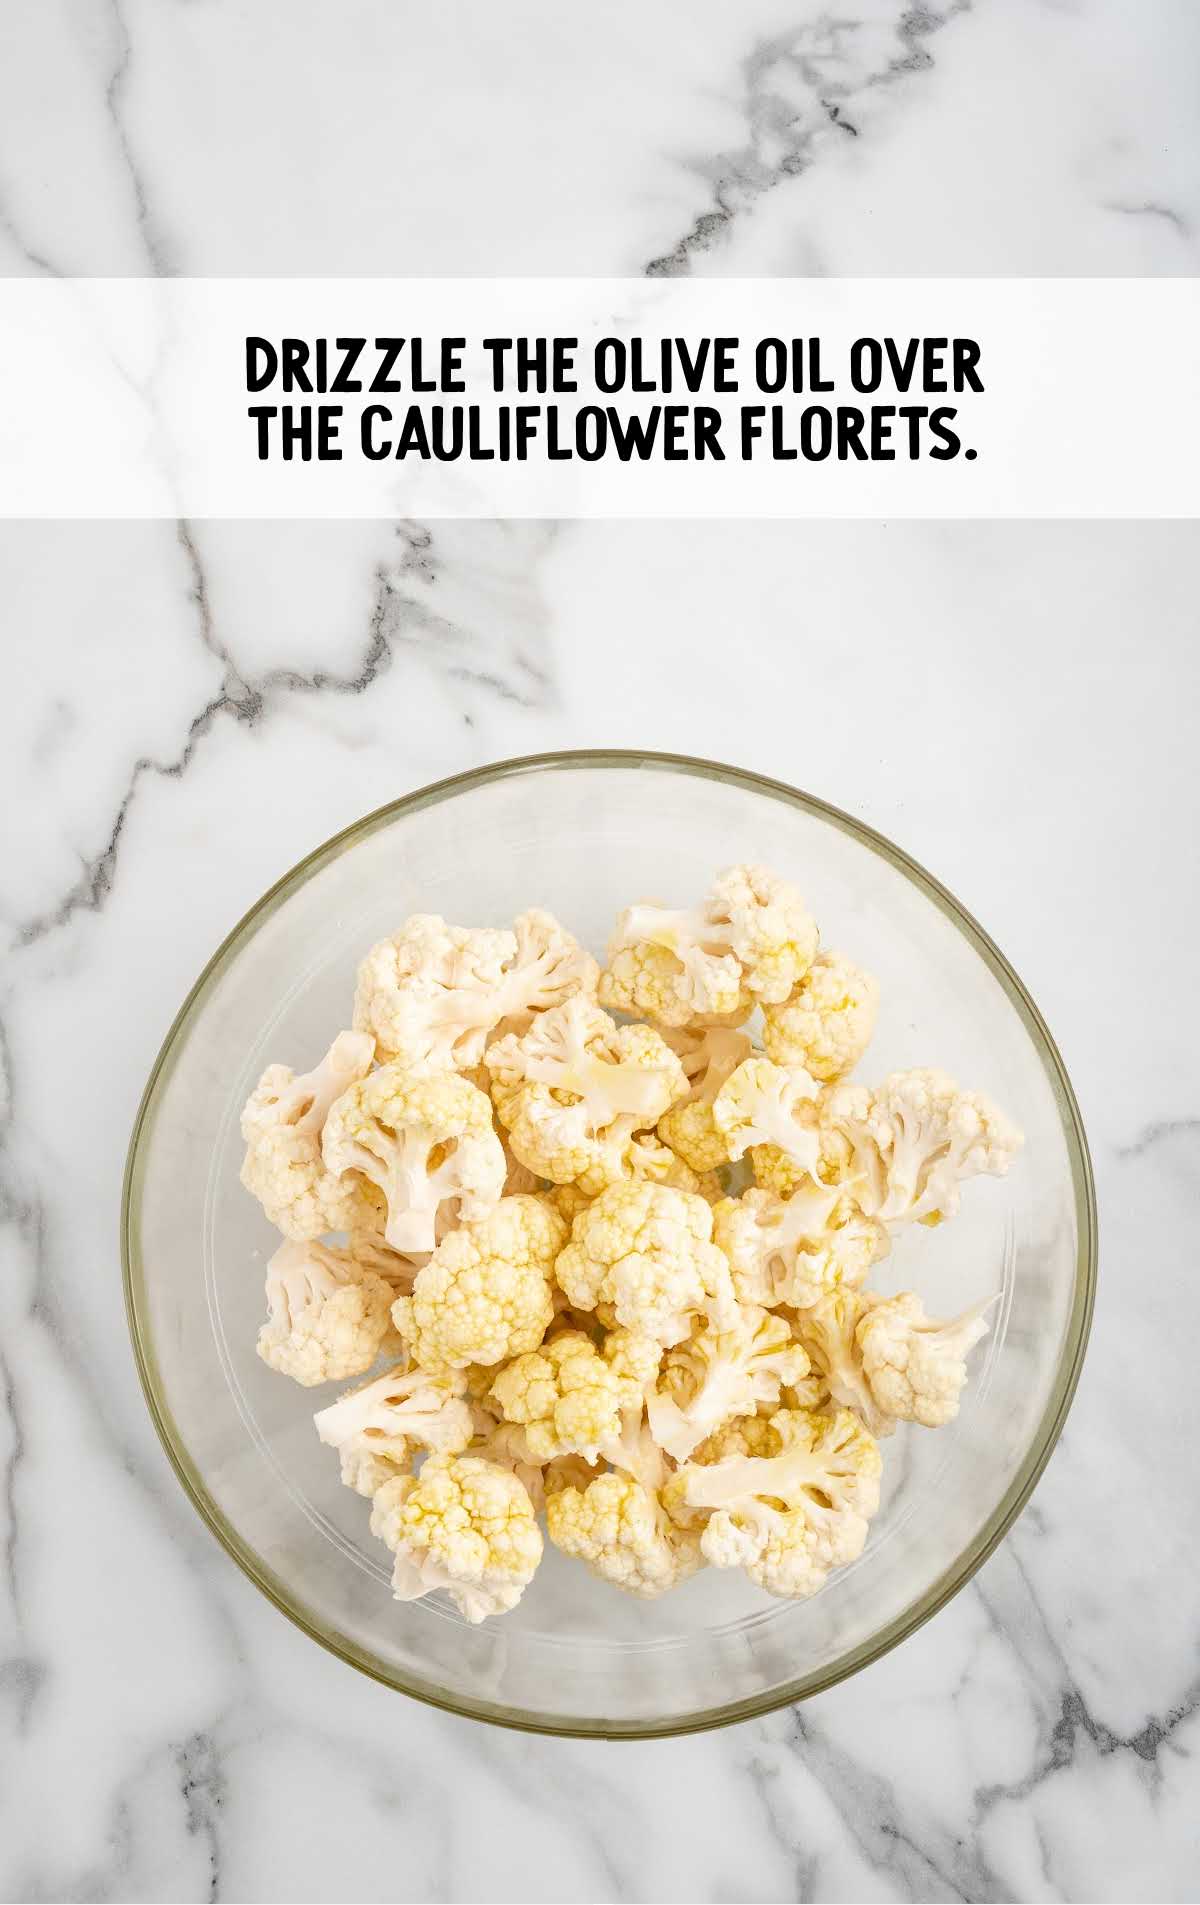 oil drizzled over the cauliflower in a bowl